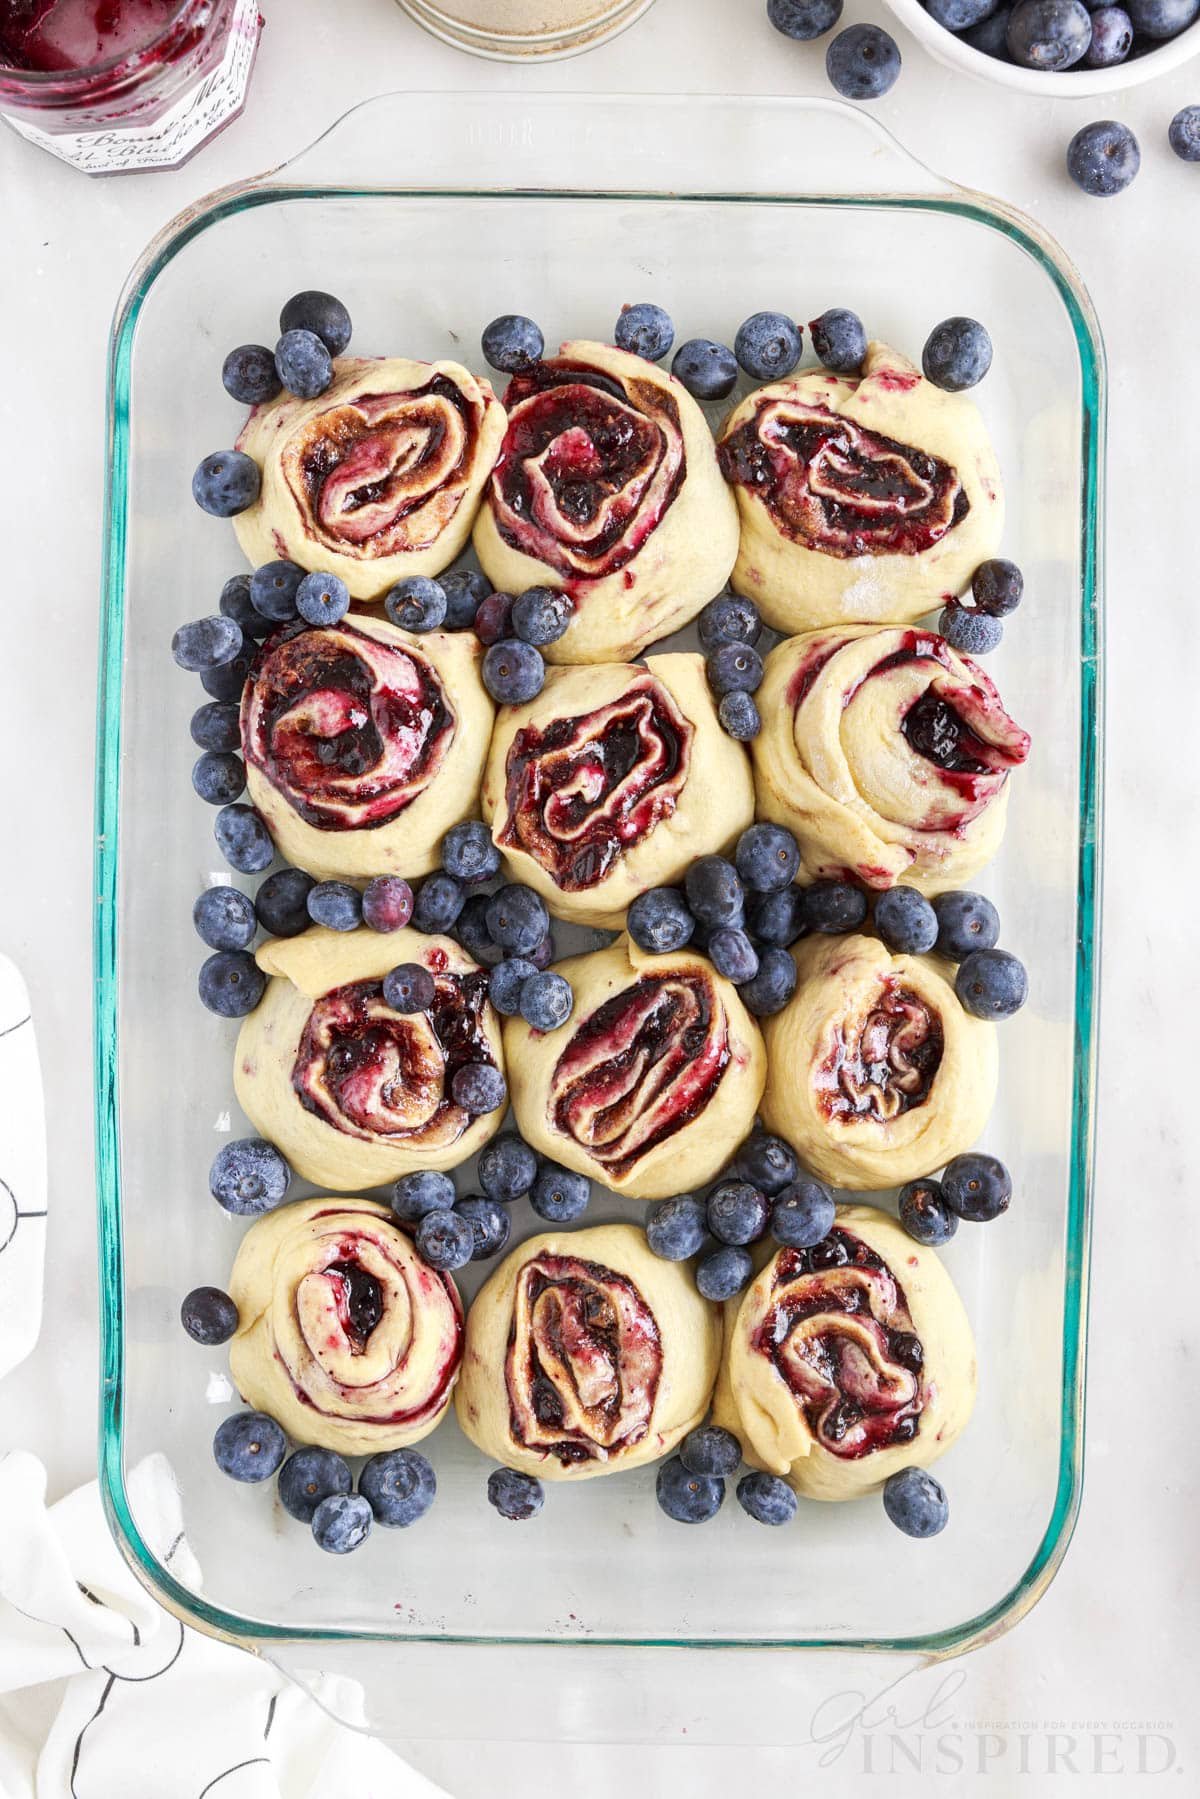 Blueberries placed around the cinnamon roll pieces in a 9x13.